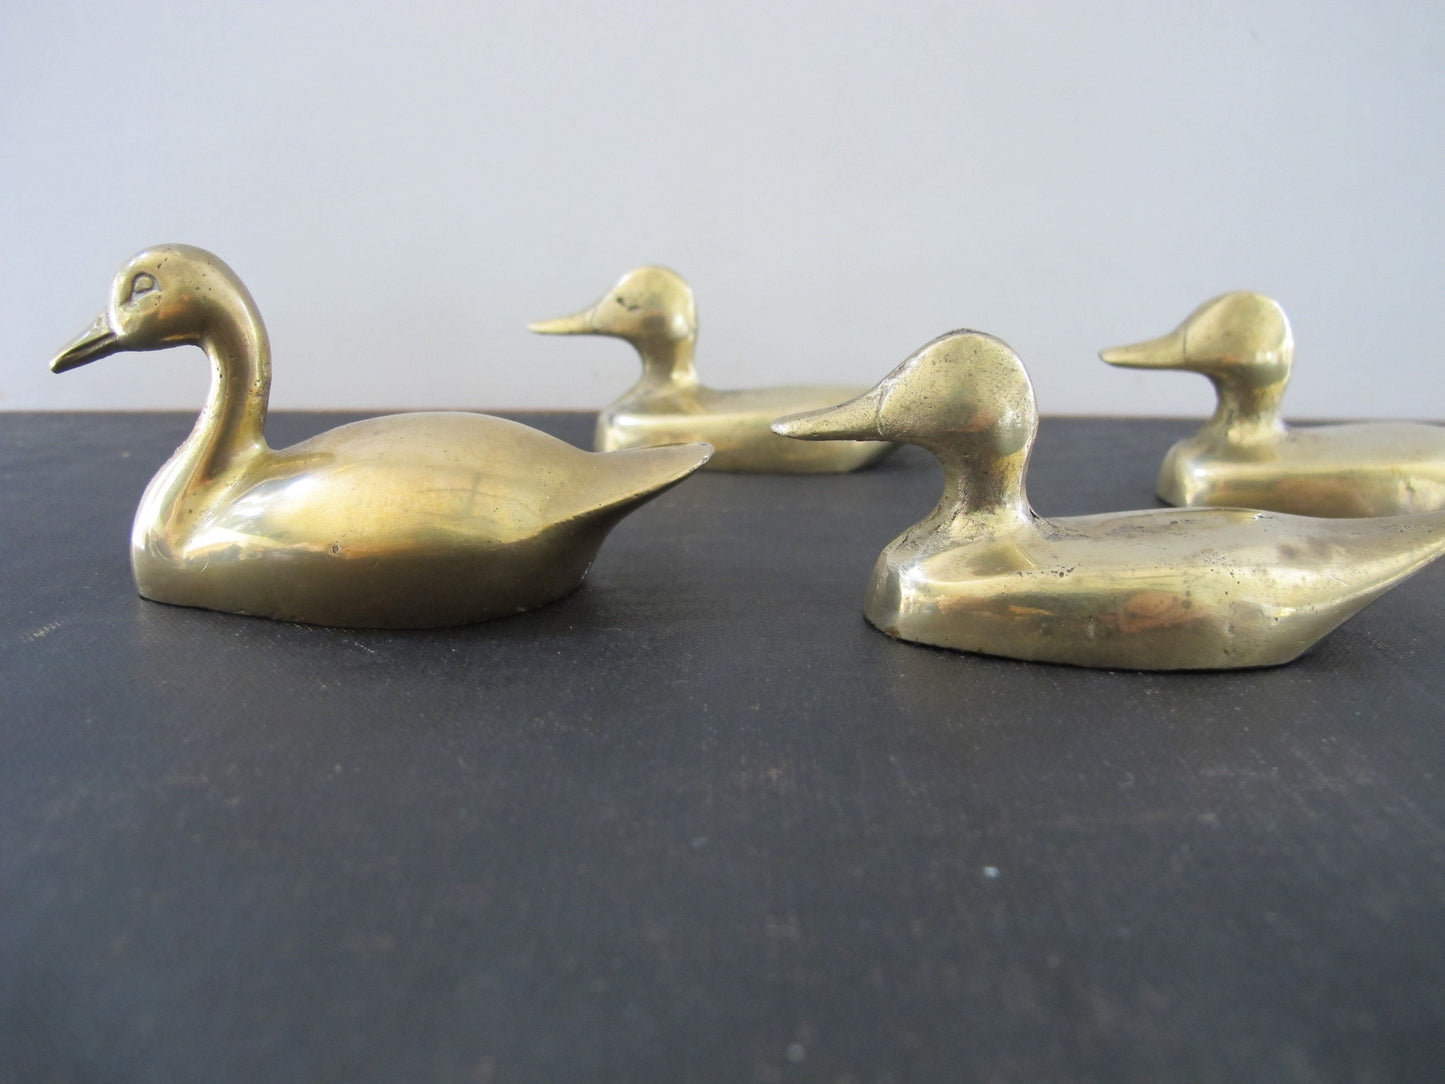 Ducks Geese Sculptures Flock of Four Solid Brass 1940s 1950s